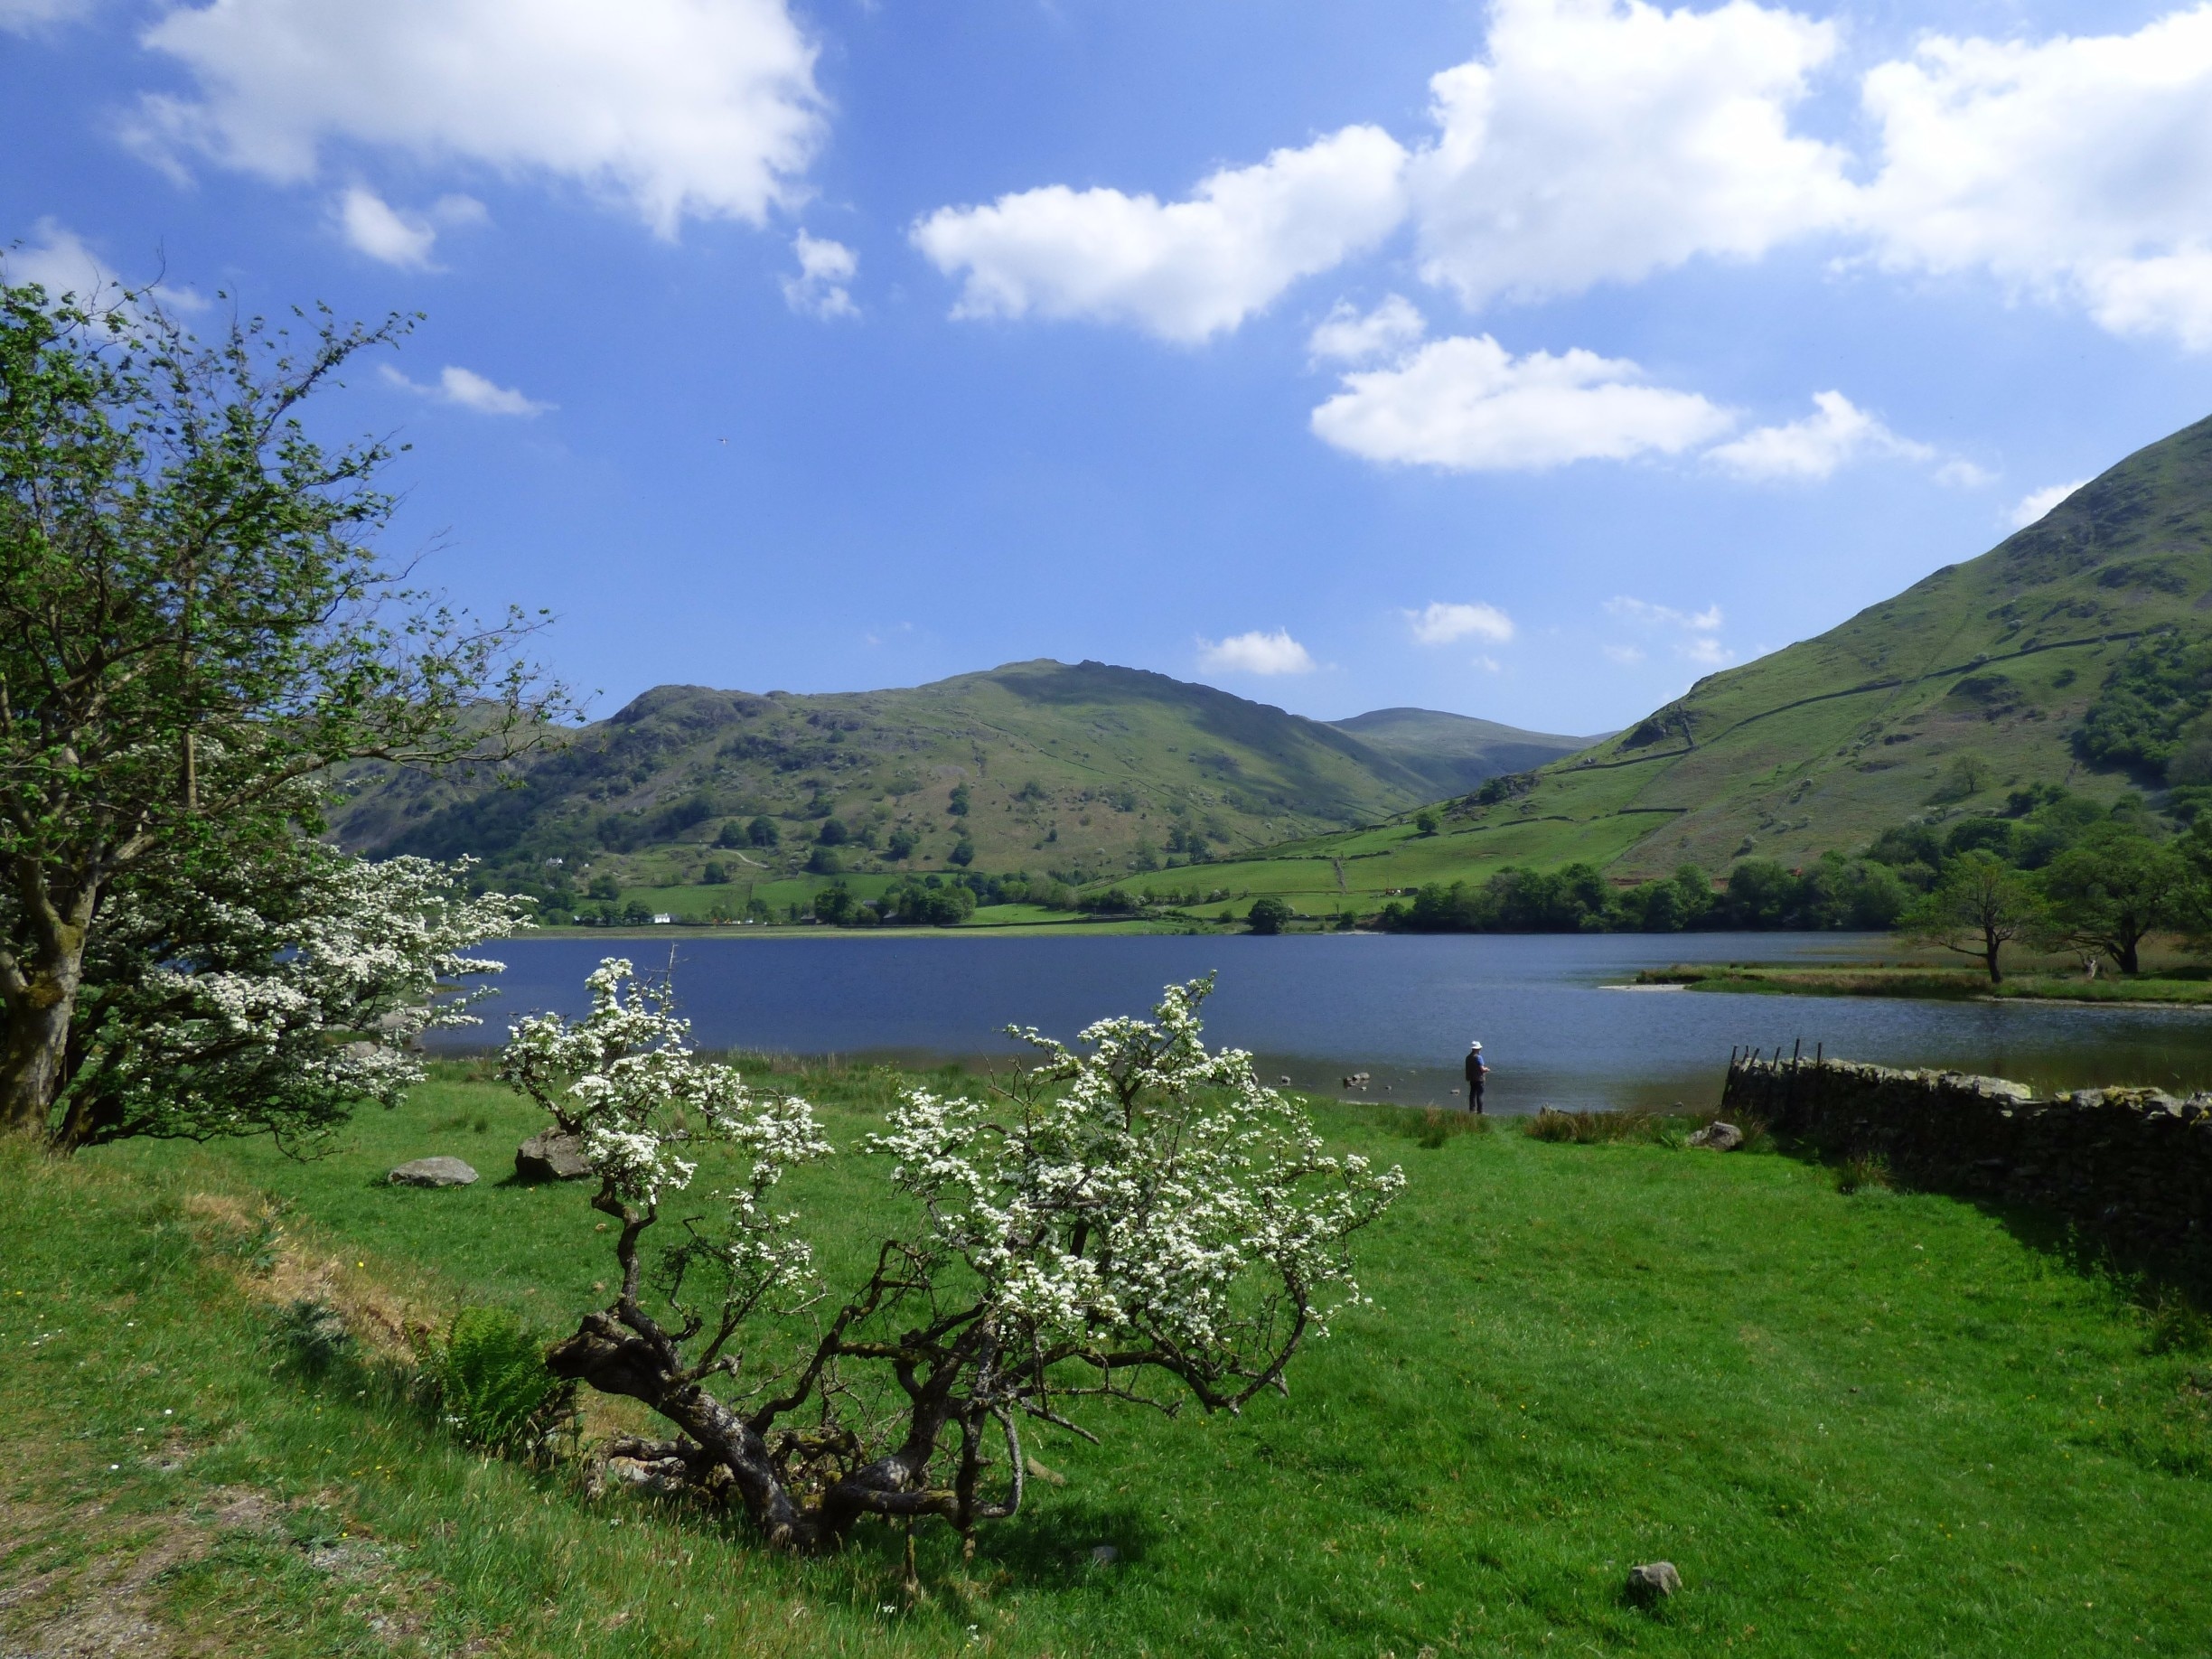 One of the smaller lakes in The Lake District, it lies at the bottom of the Kirkstone Pass, with views over lovely Patterdale valley. There is a lakeside path and a pleasant level walk from Cow bridge car park, will lead you to a campsite and The brotherswater Inn. Both pet friendly.